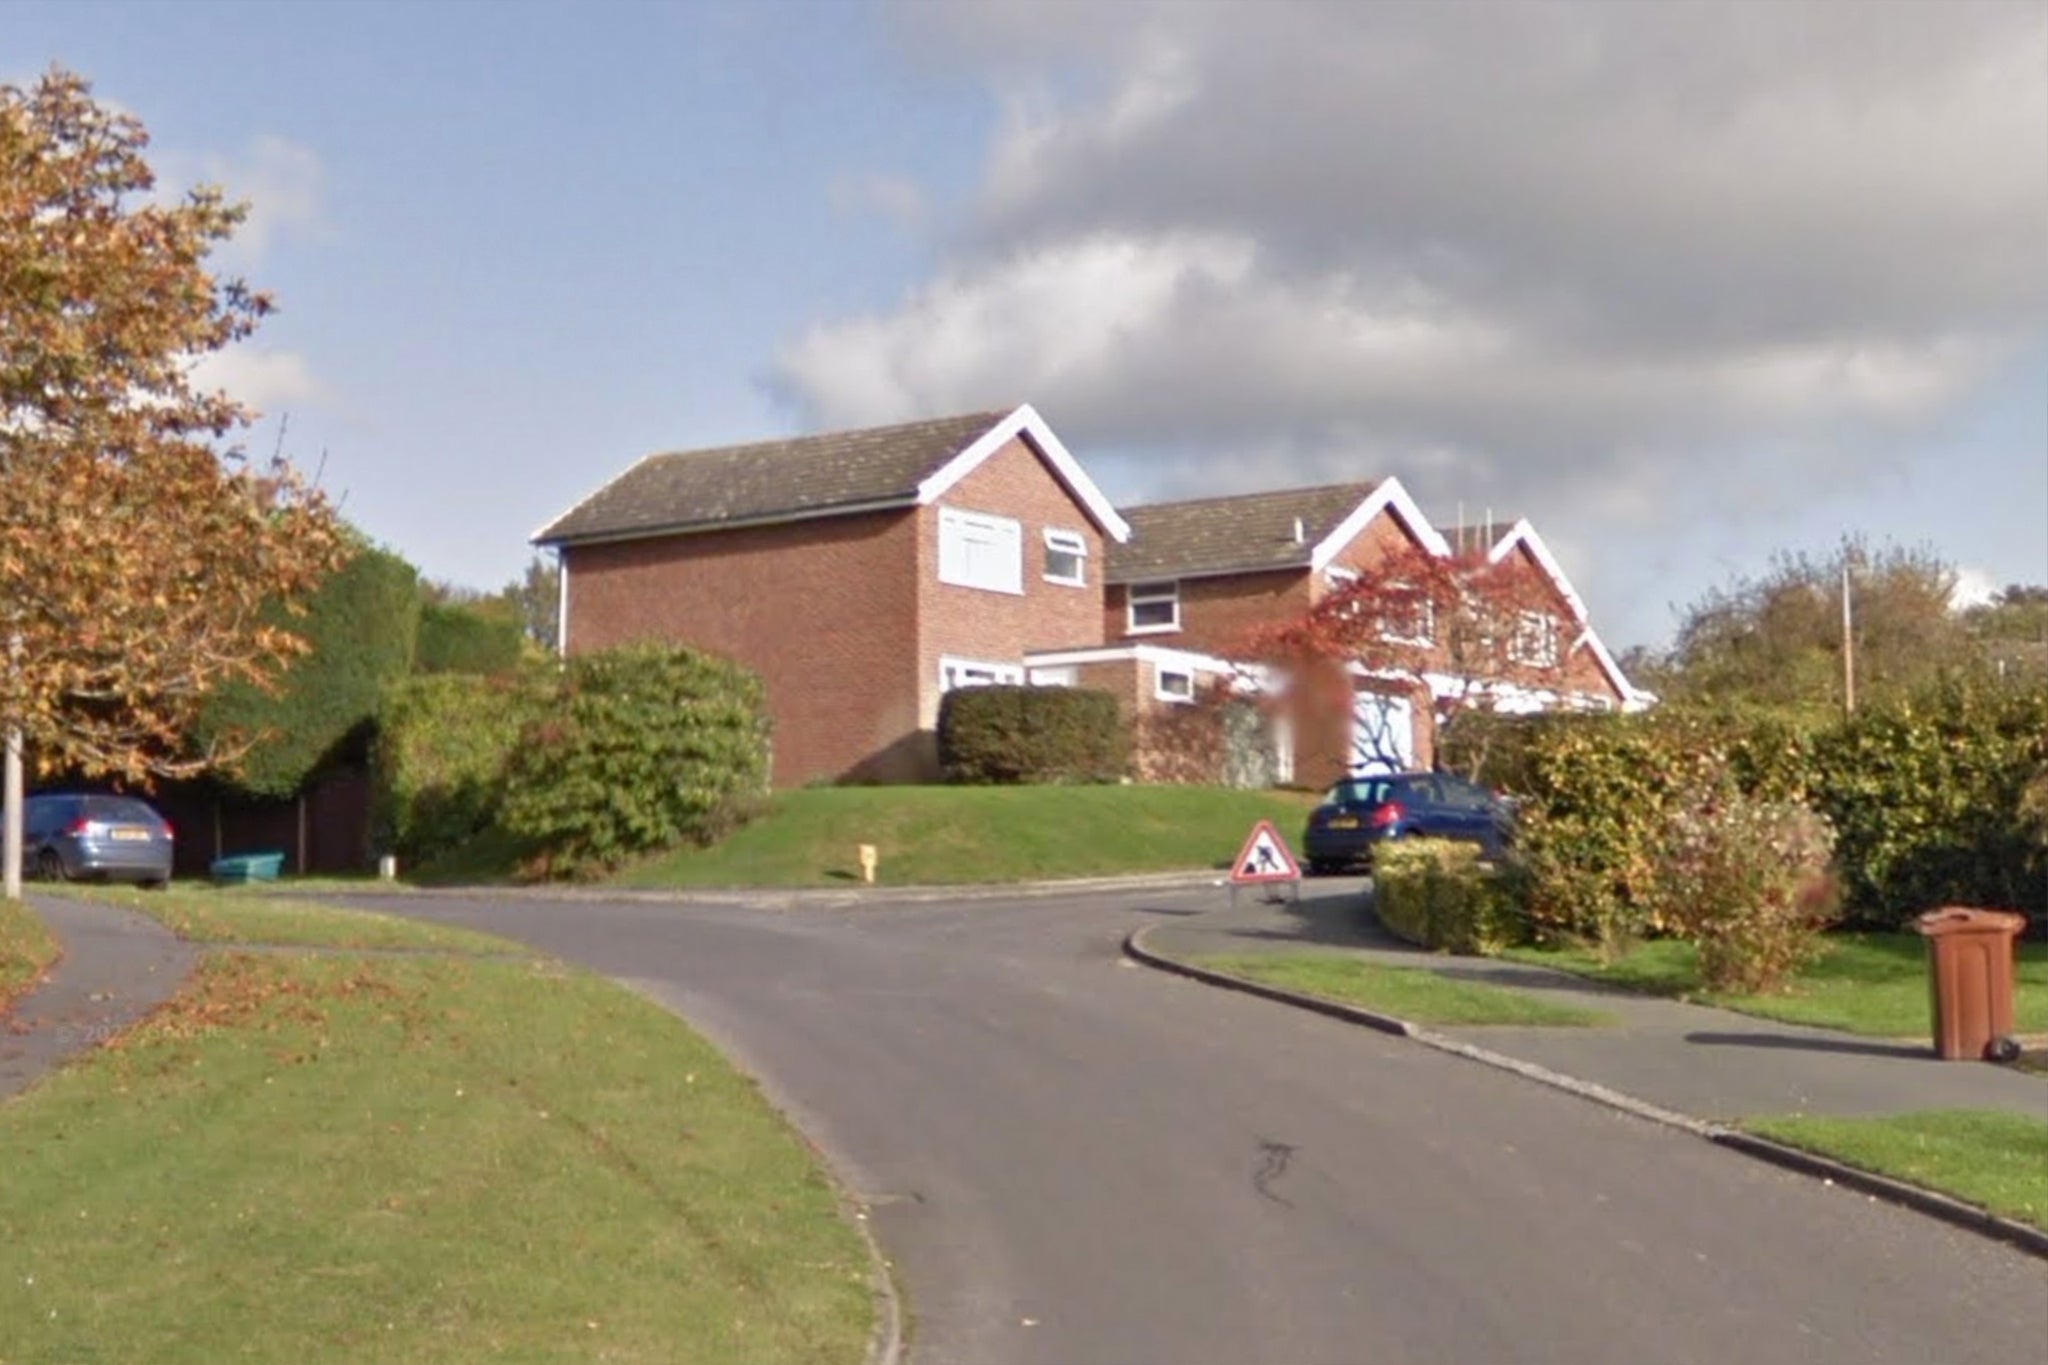 Two children were taken to hospital in a suspected poisoning in East Sussex